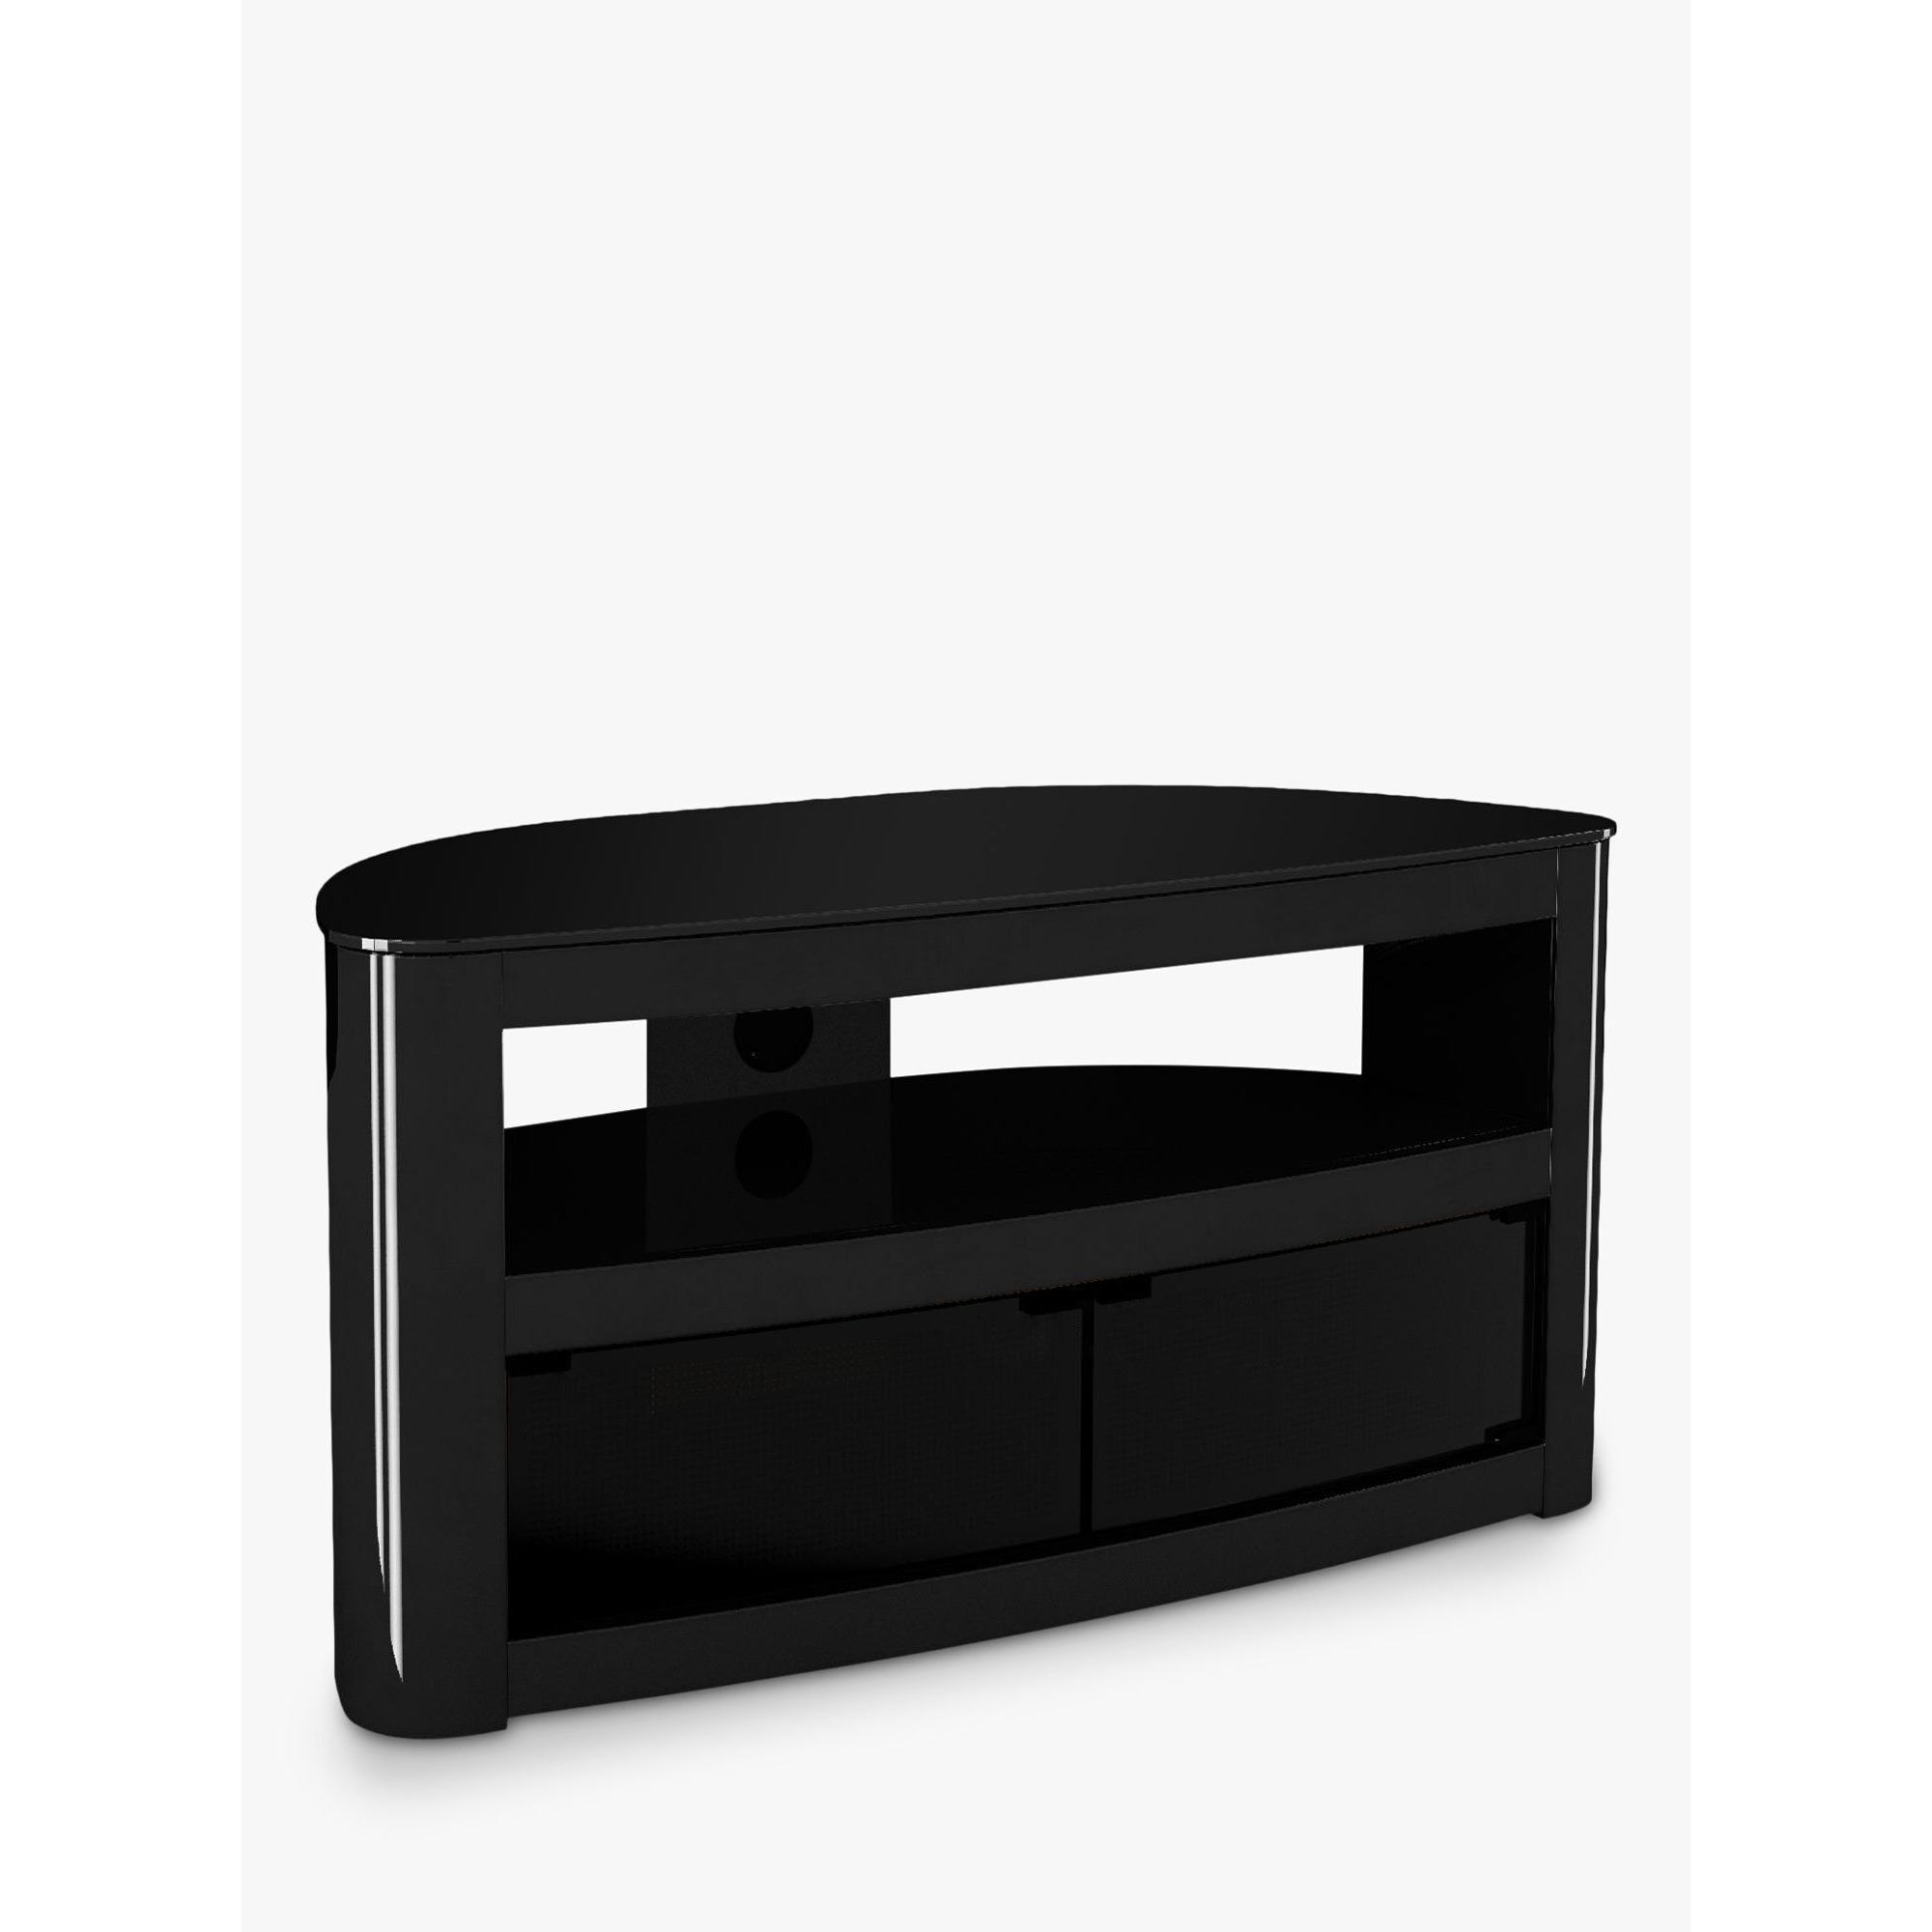 "AVF Affinity Premium Burghley 1000 TV Stand For TVs Up To 50""" - image 1